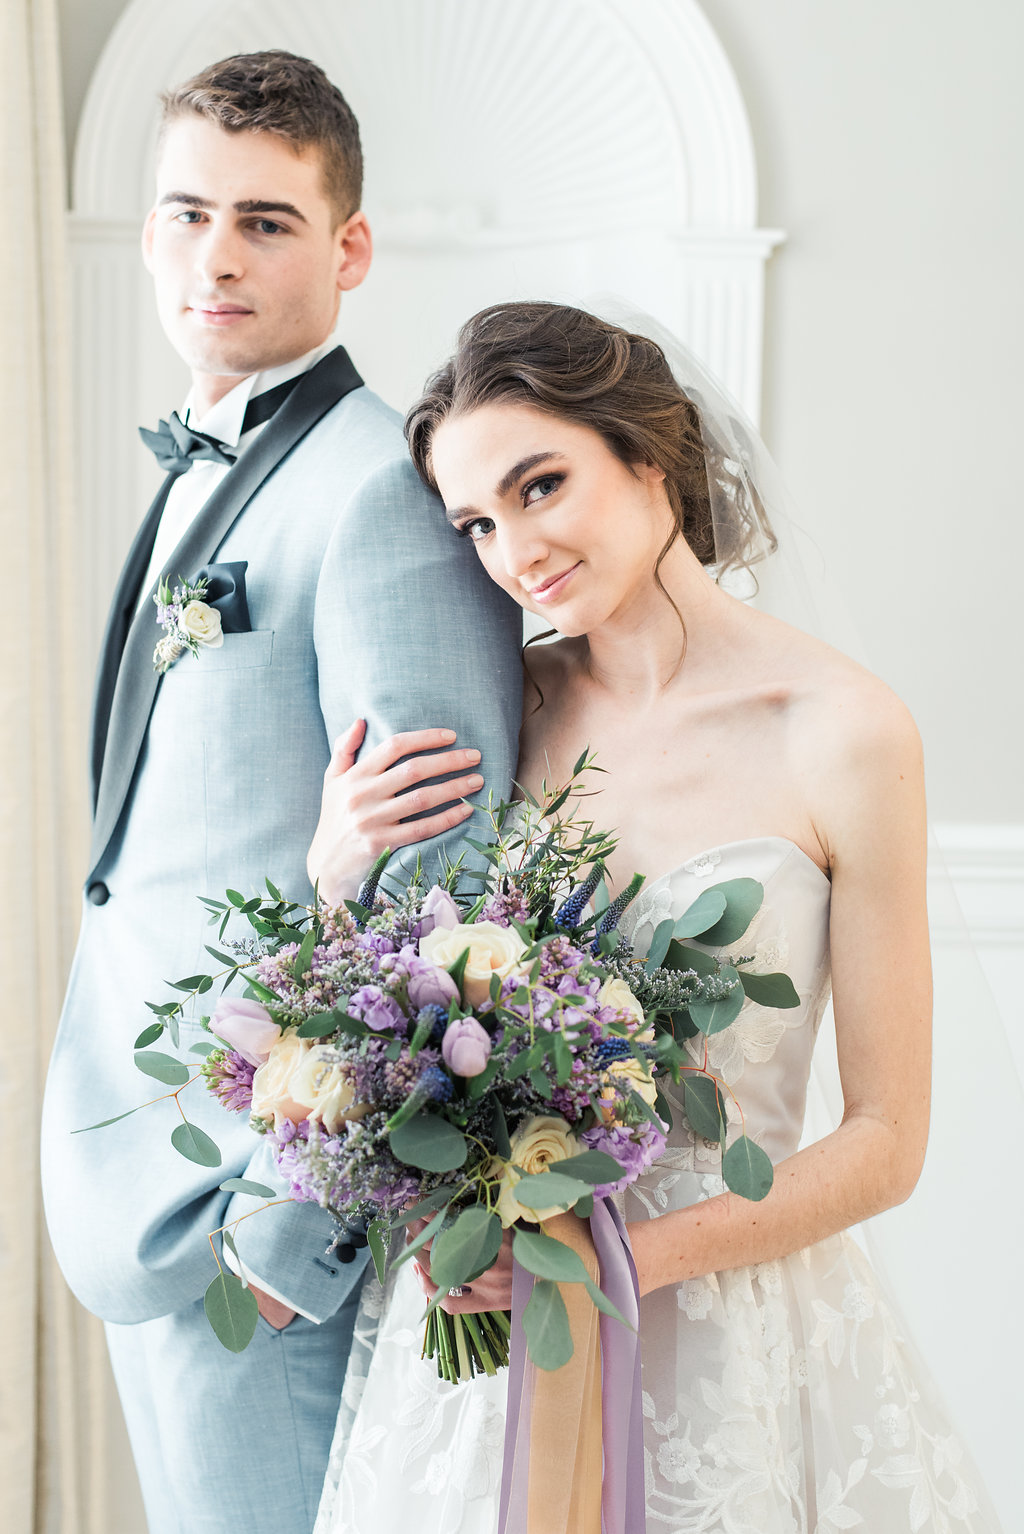 The Commons 1854 Bridal Styled Shoot Bride and Groom